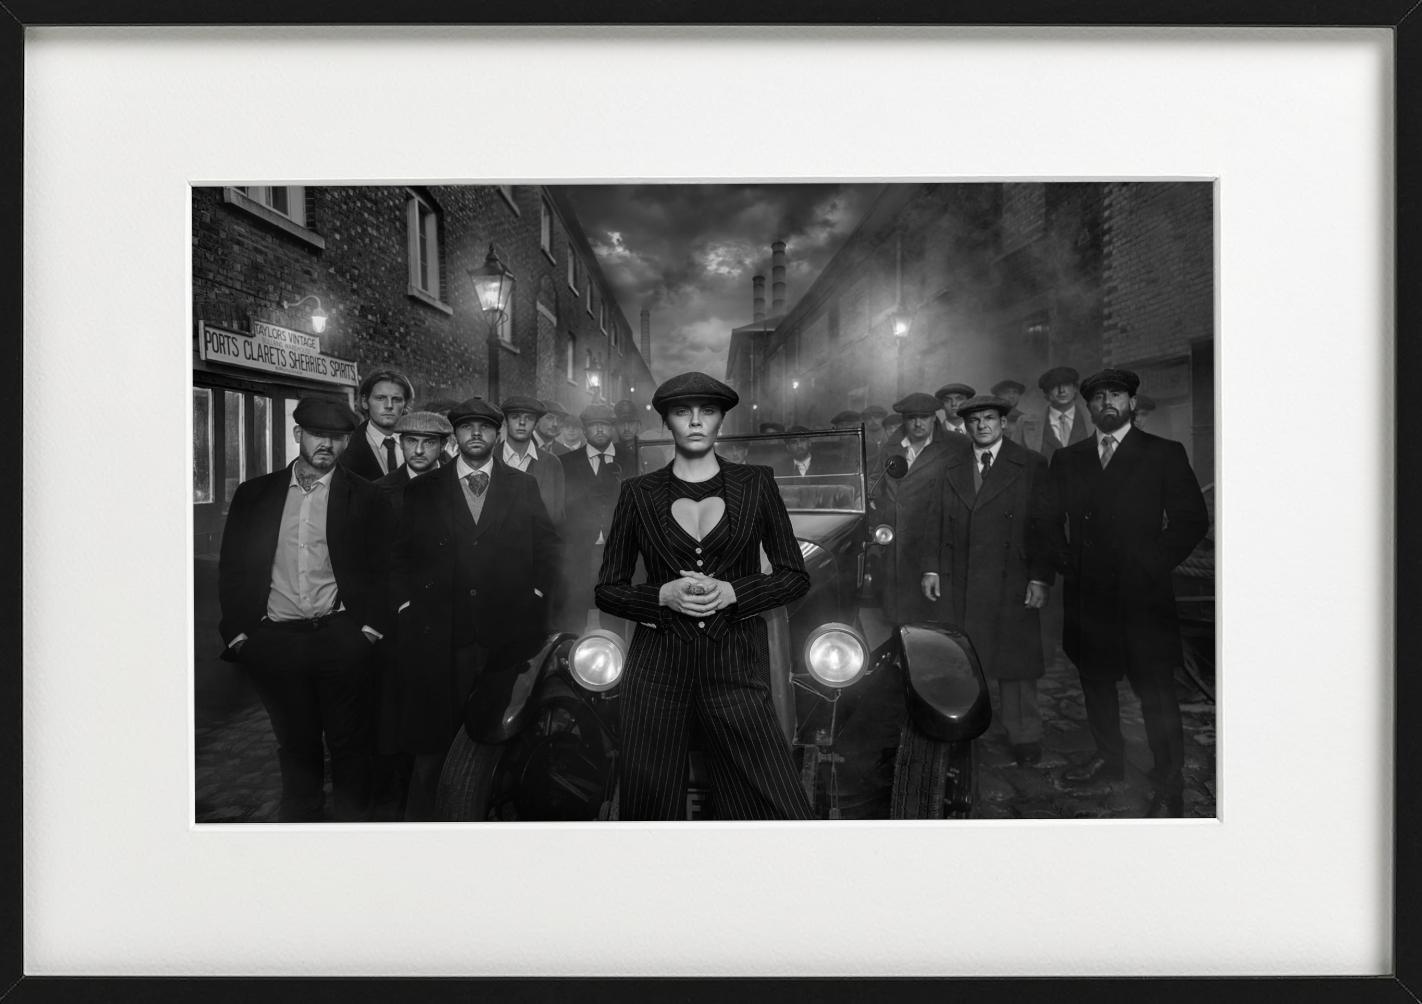 By order of the Peaky Blinders - Cara in the role of Thomas Shelby, 2023 - Contemporary Photograph by David Yarrow